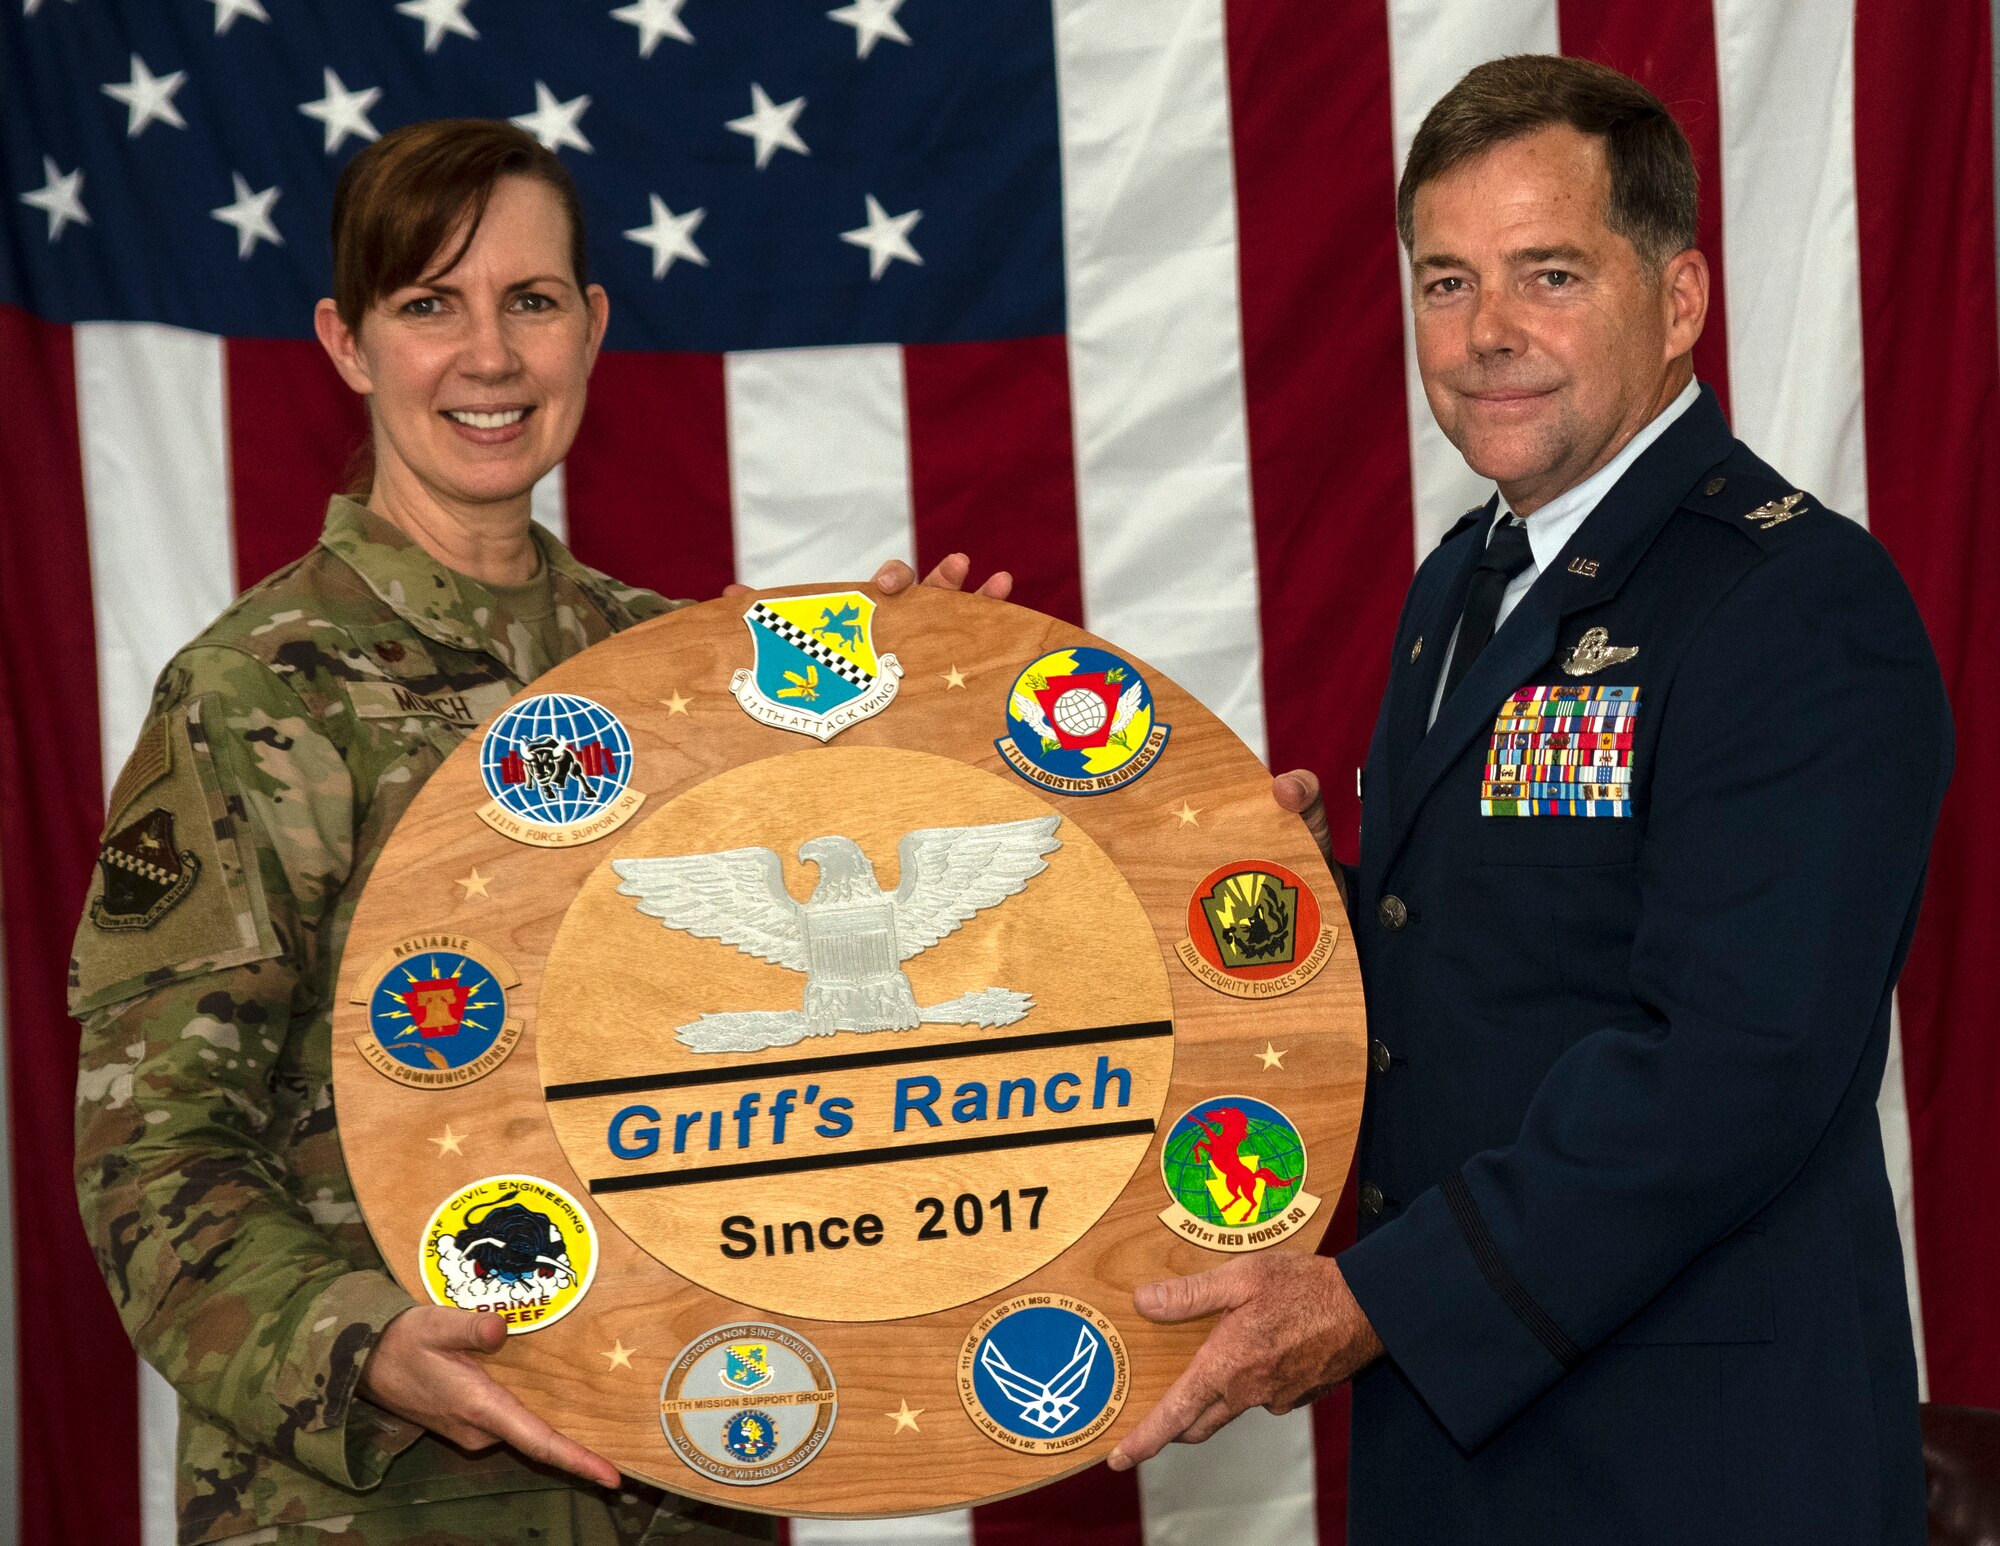 A woman wearing an Air Force camouflage uniform presents a plaque to a man wearing an Air Force Dress Blues.